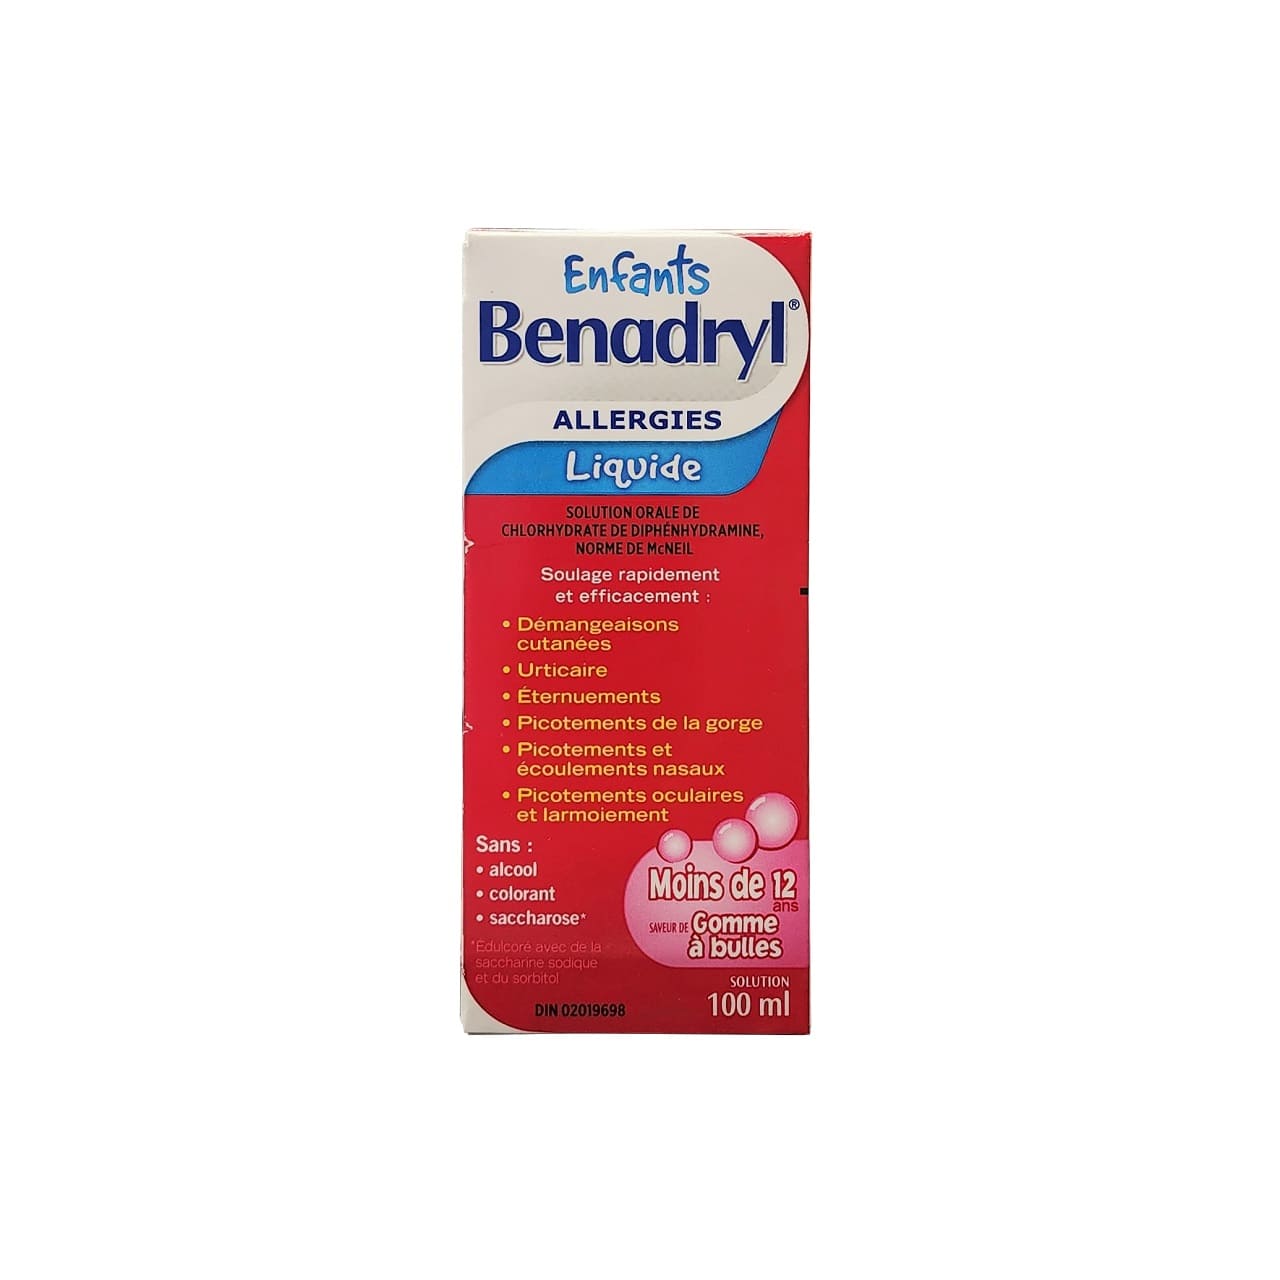 Product label for Benadryl Allergy Liquid for Children Diphenhydramine Hydrochloride Bubble Gum Flavour (100 mL) in French